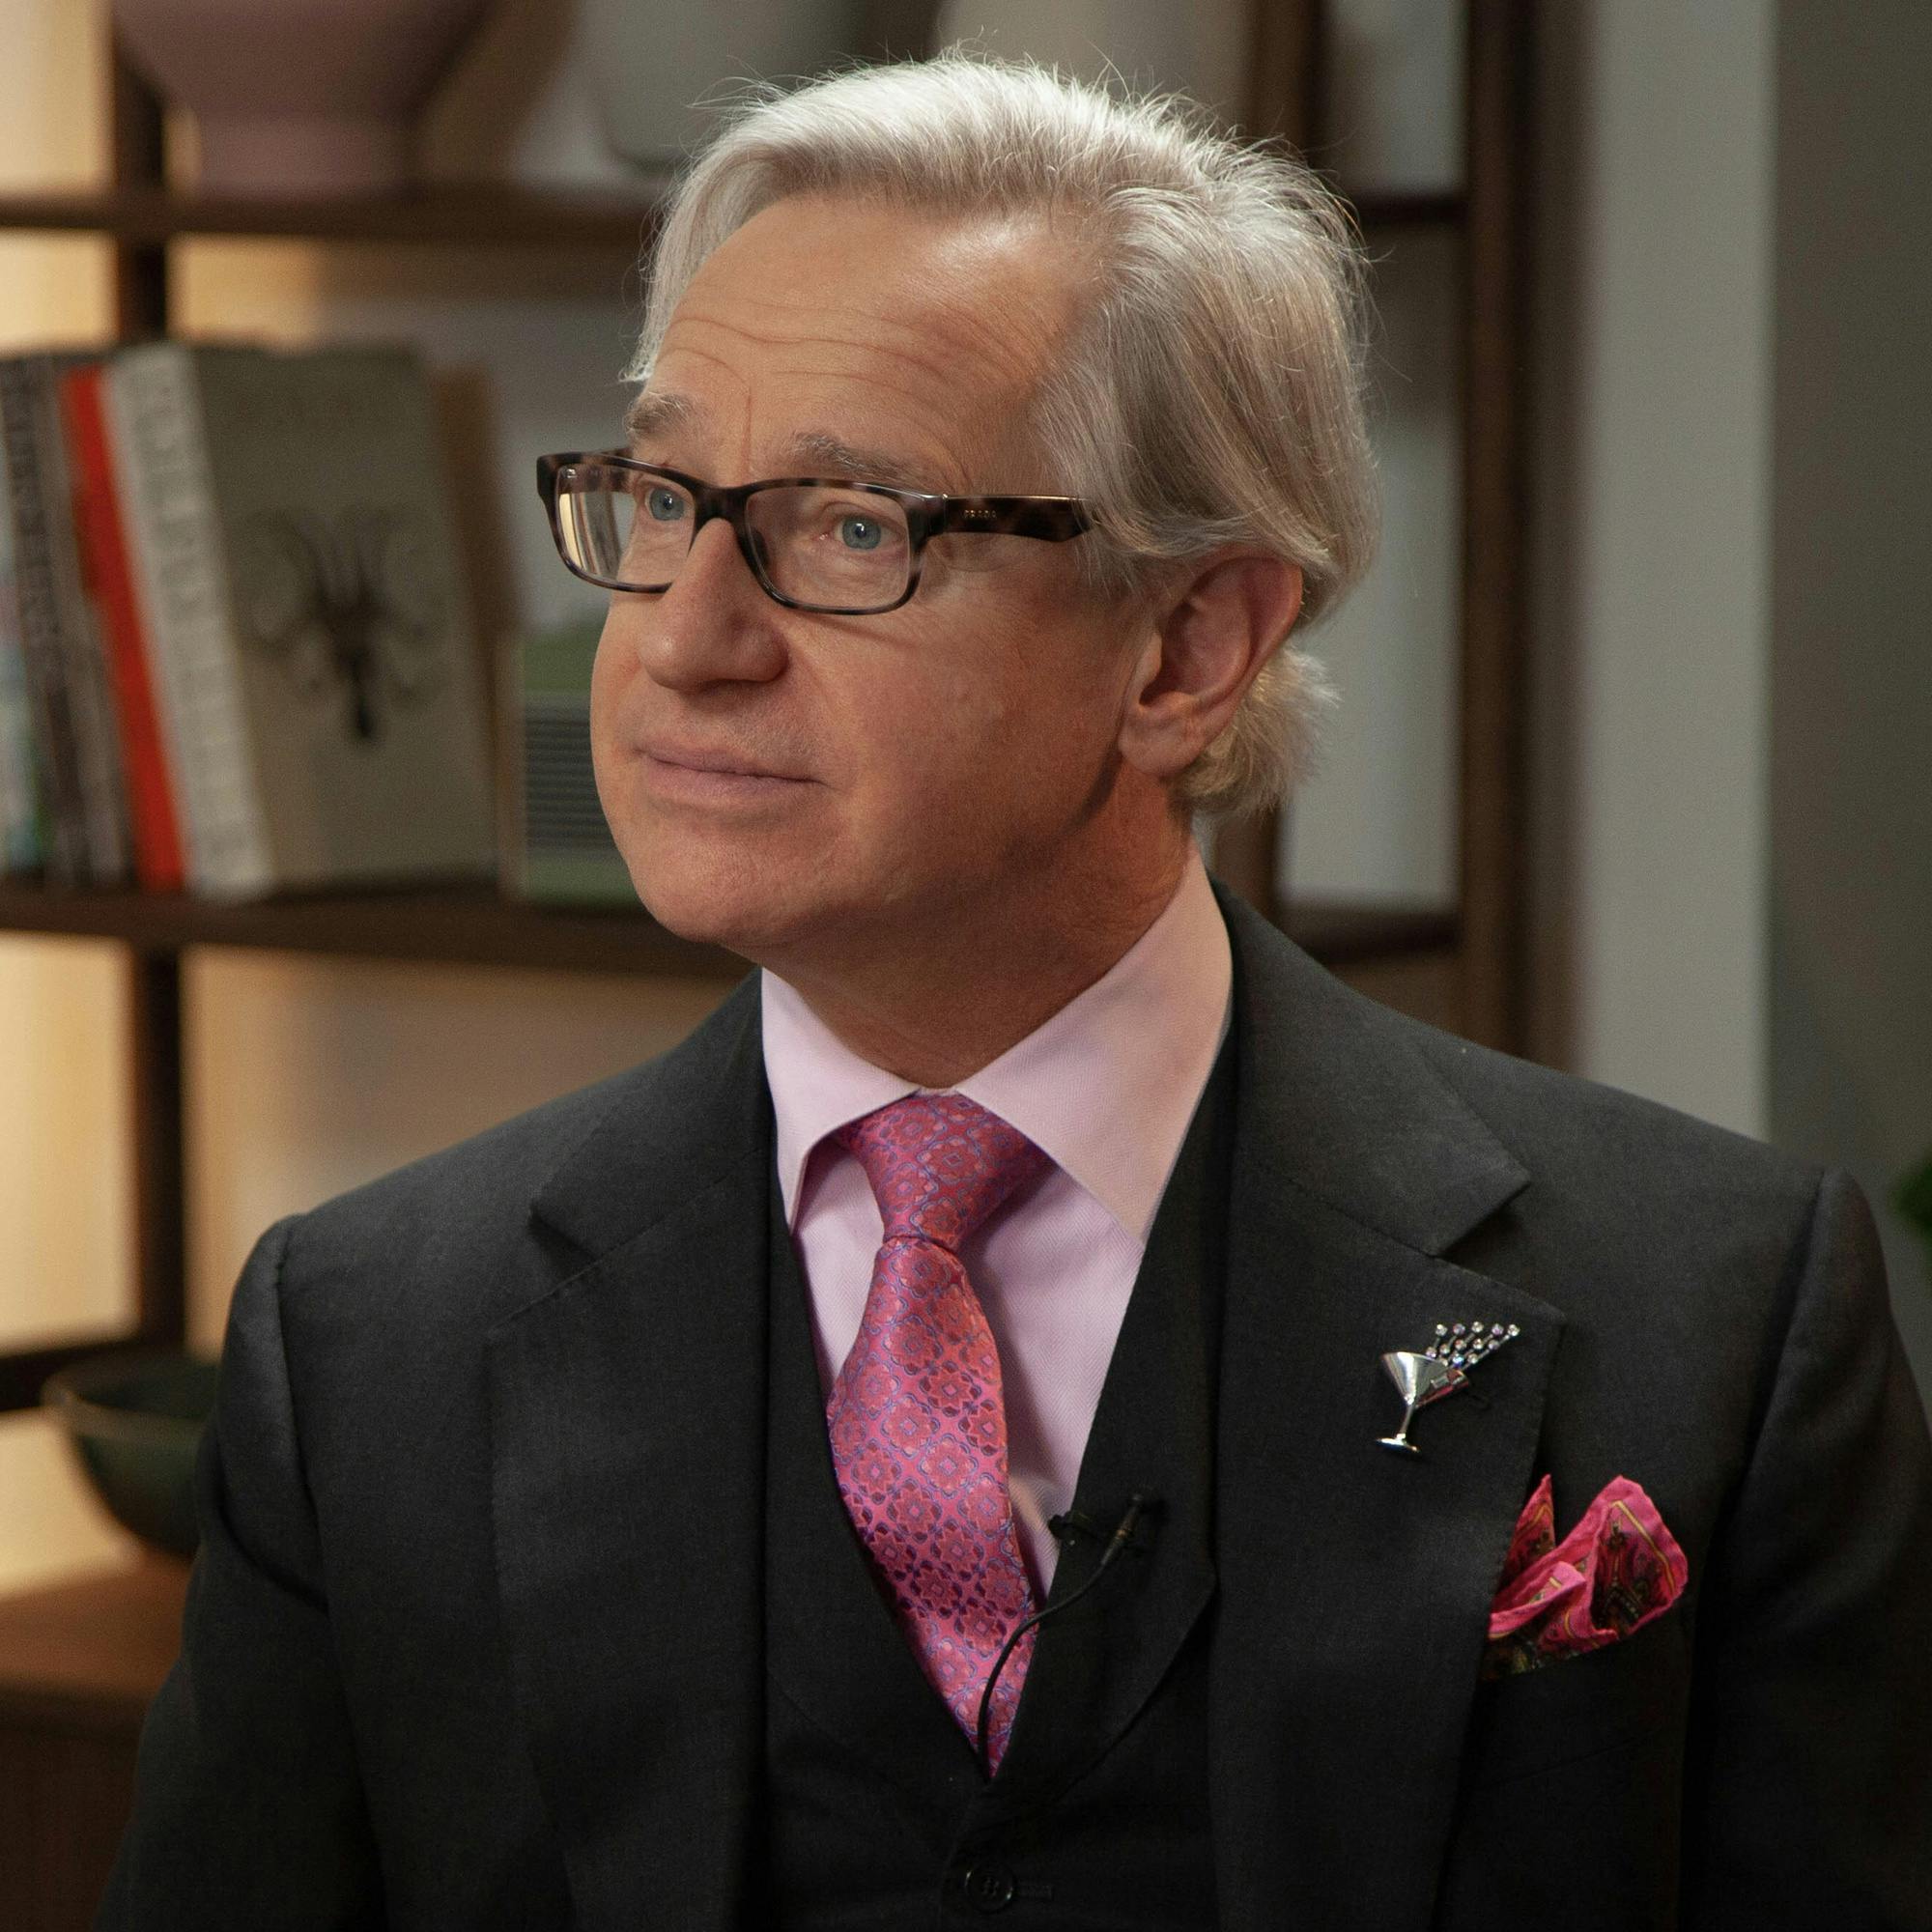 Actor and Bridesmaids Director Paul Feig and beef tacos